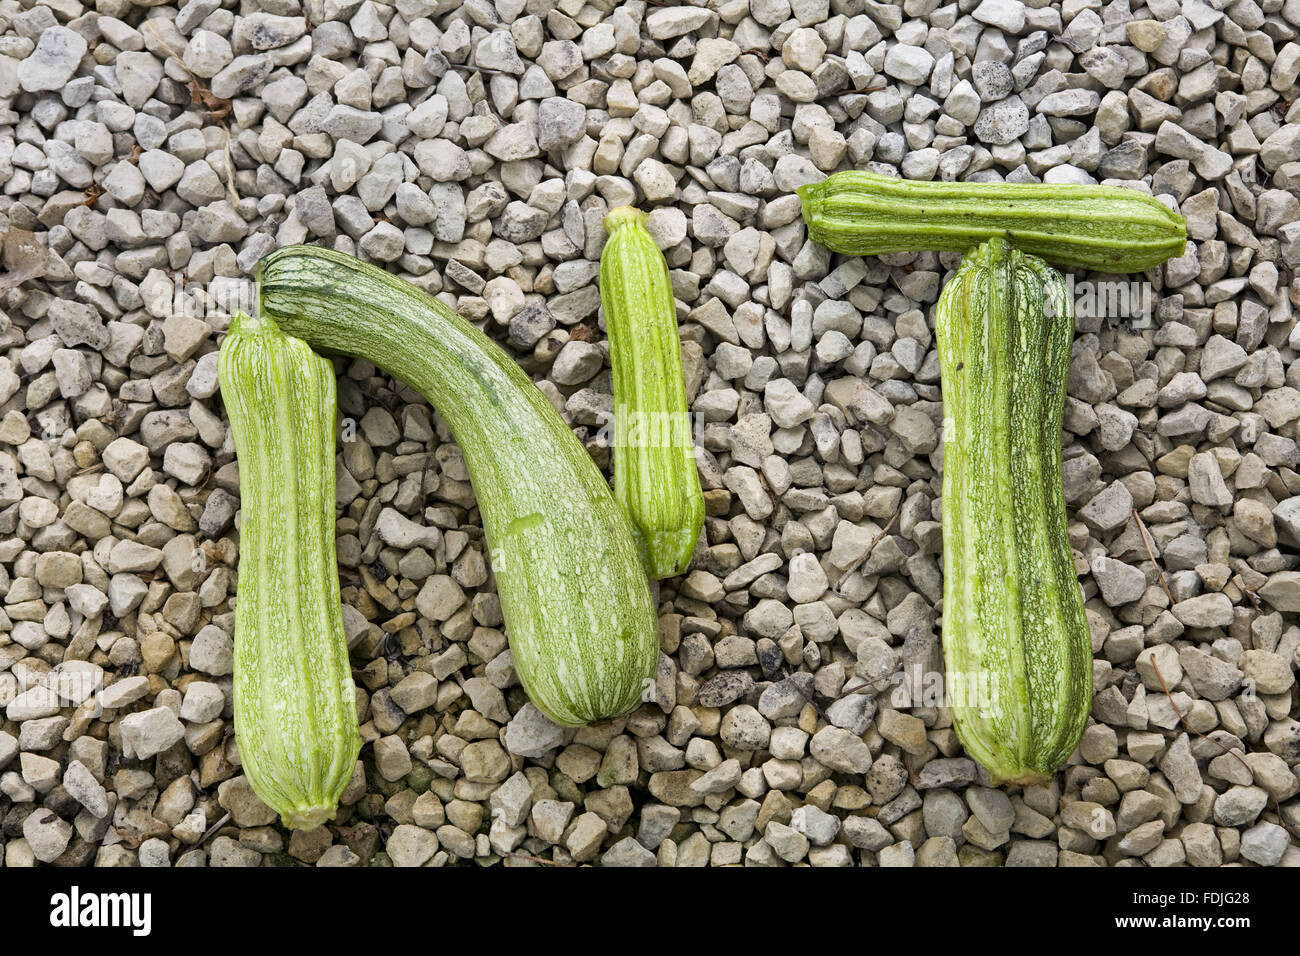 Courgettes arranged as the letters 'NT' in the Walled Kitchen Garden at Clumber Park, Nottinghamshire. Stock Photo